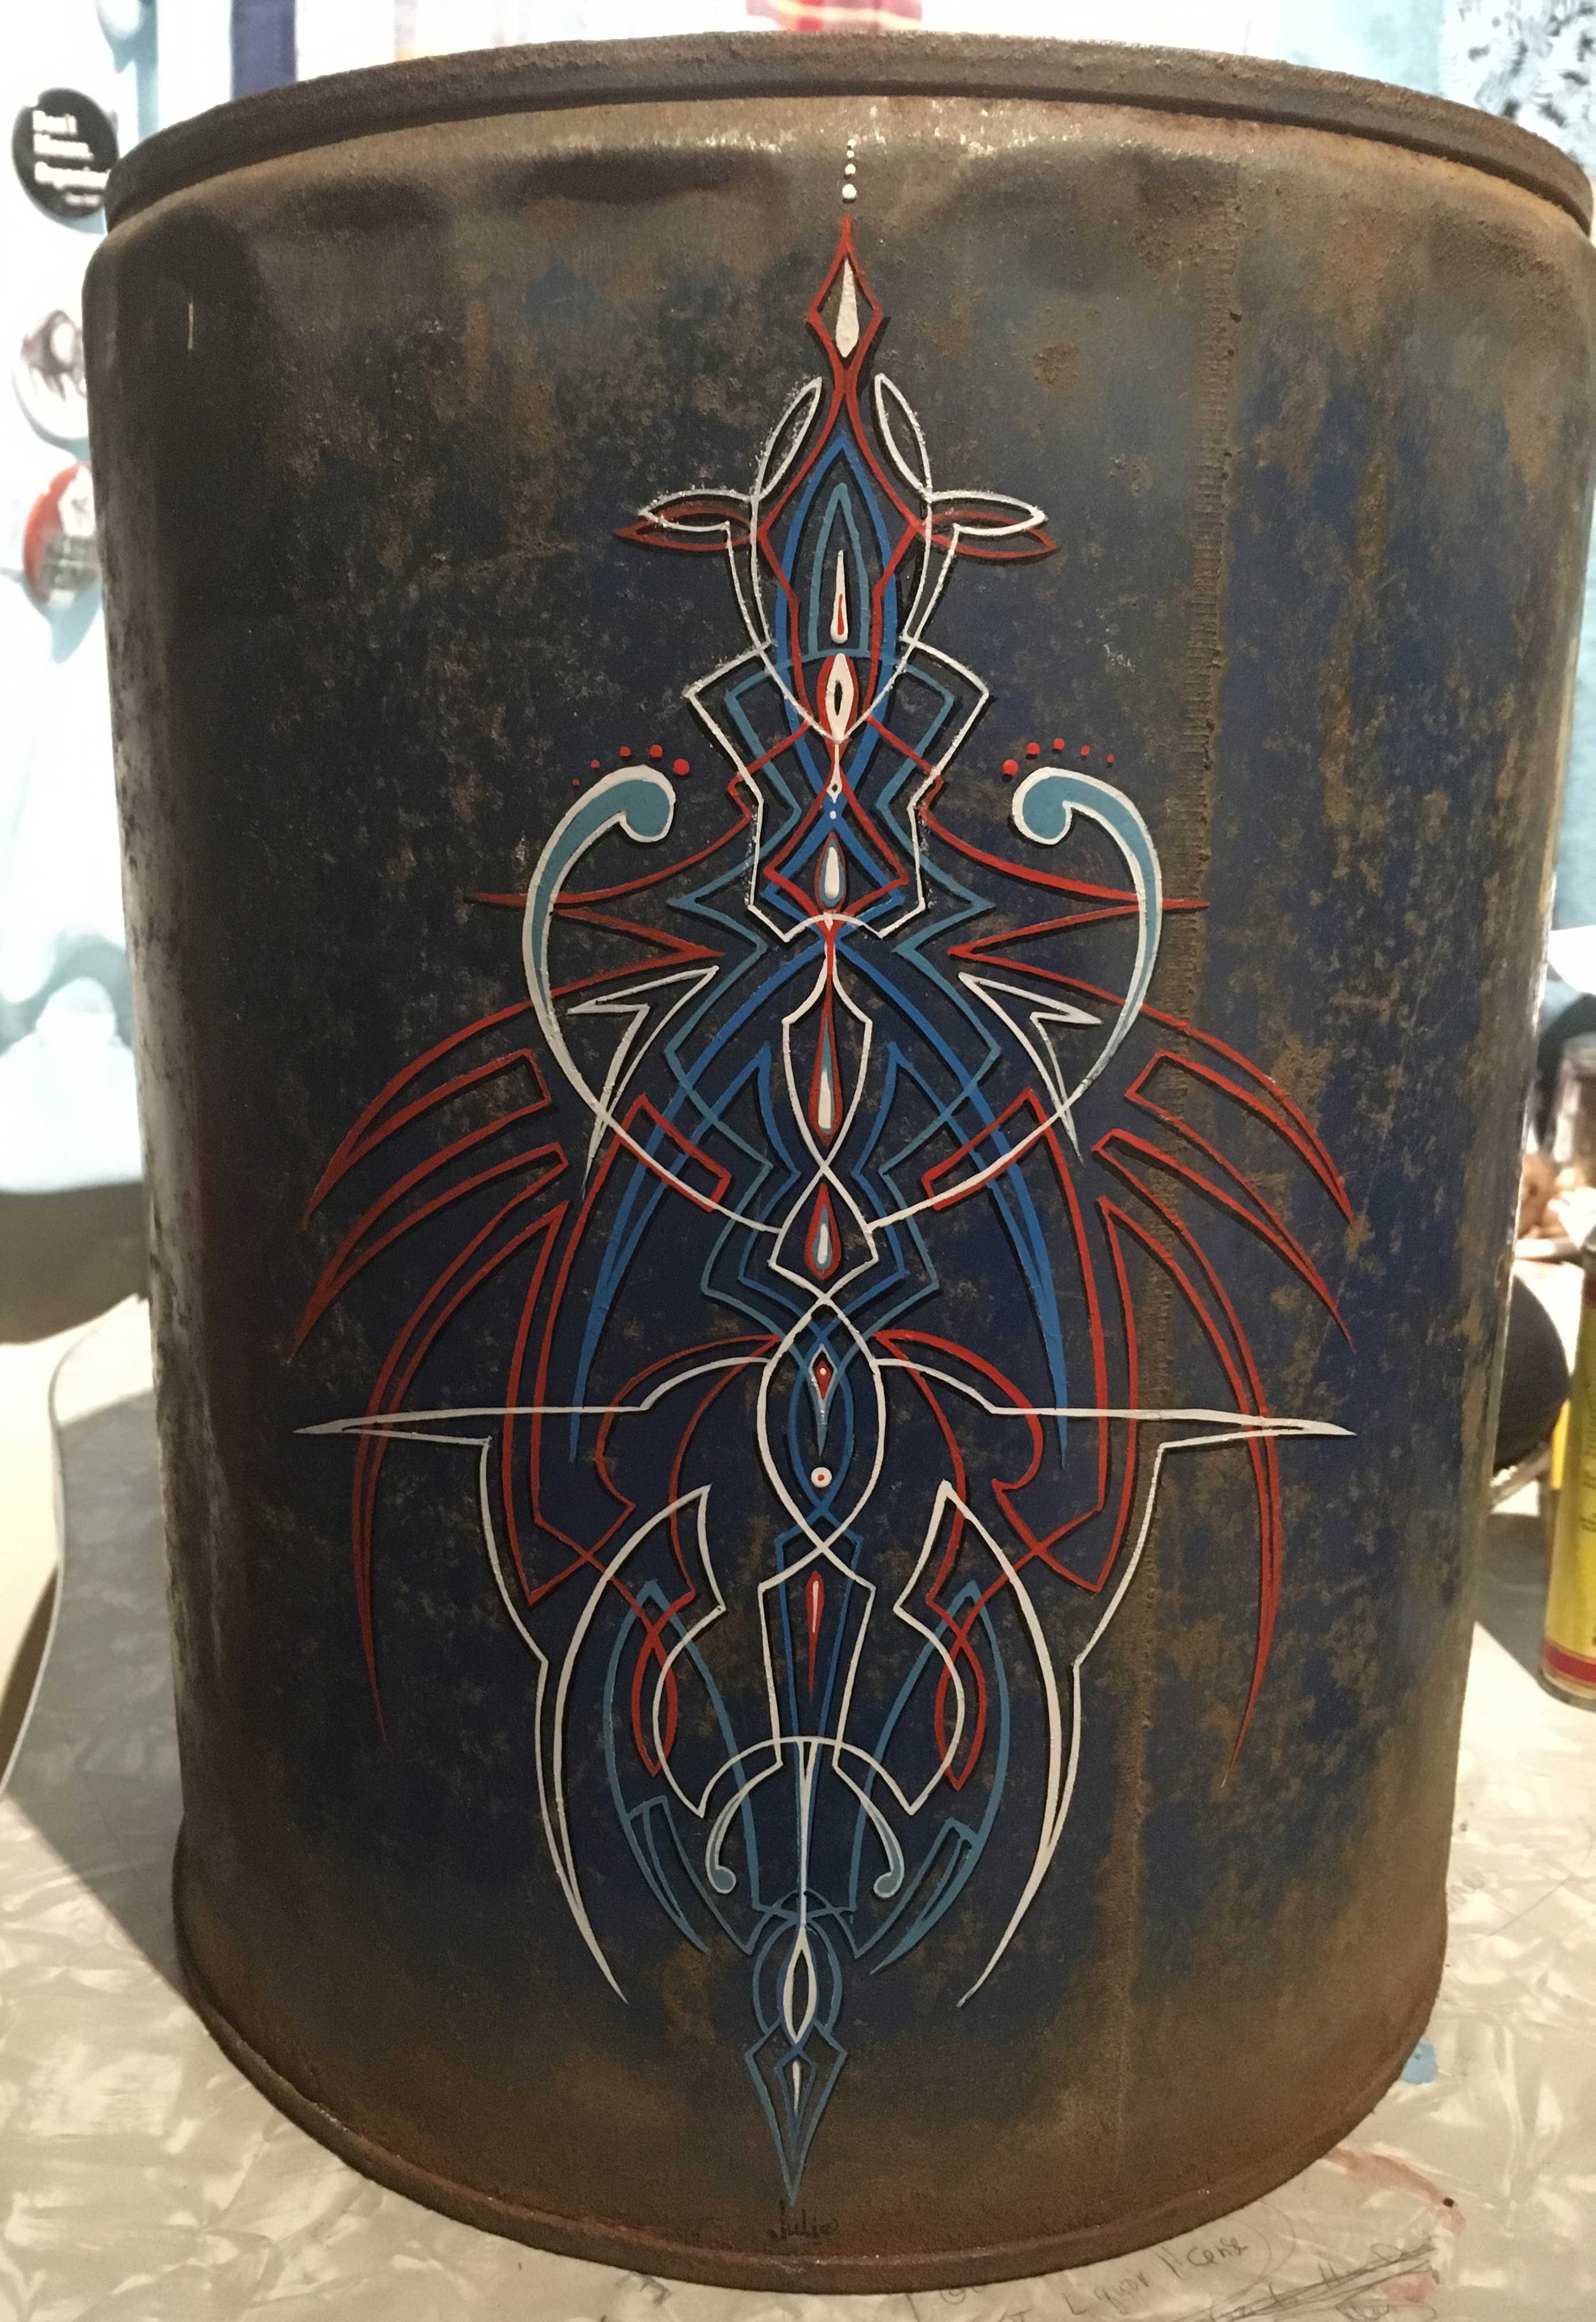 Pinstriped antique gas can by Julie Fournier